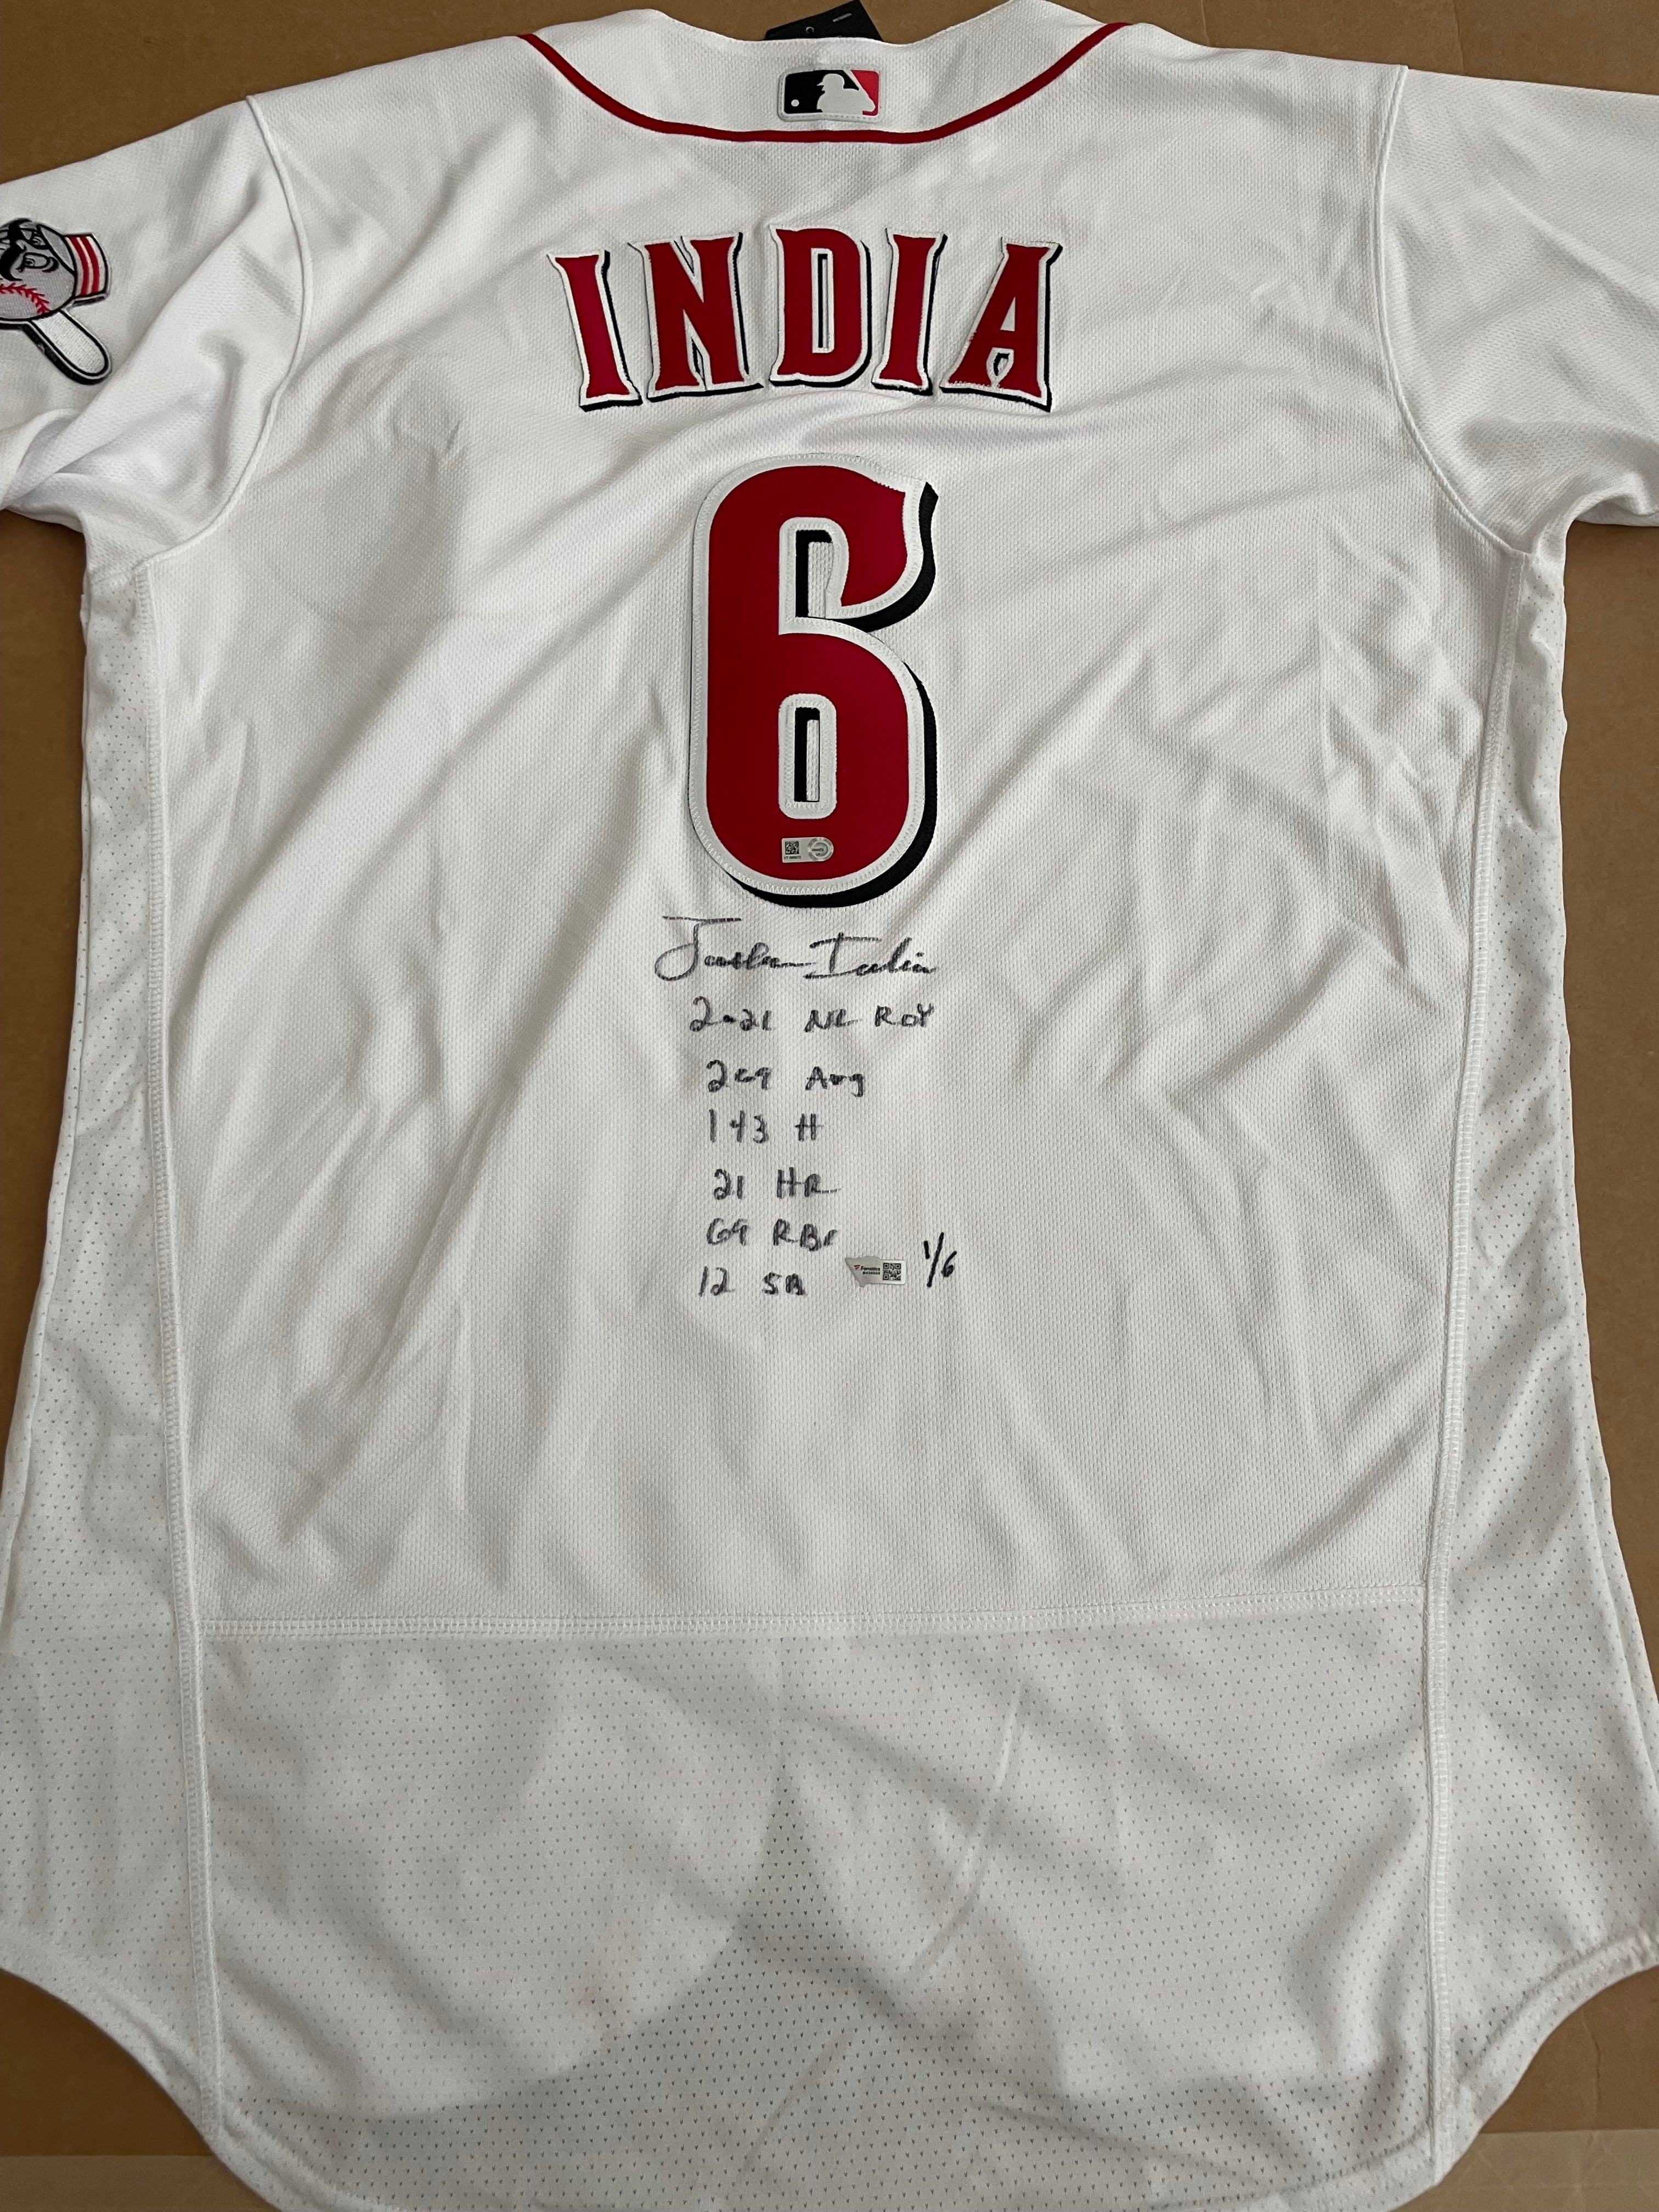 Jonathan India White Cincinnati Reds Autographed Nike Authentic Jersey with  2021 Stats Inscriptions - Limited Edition of 6